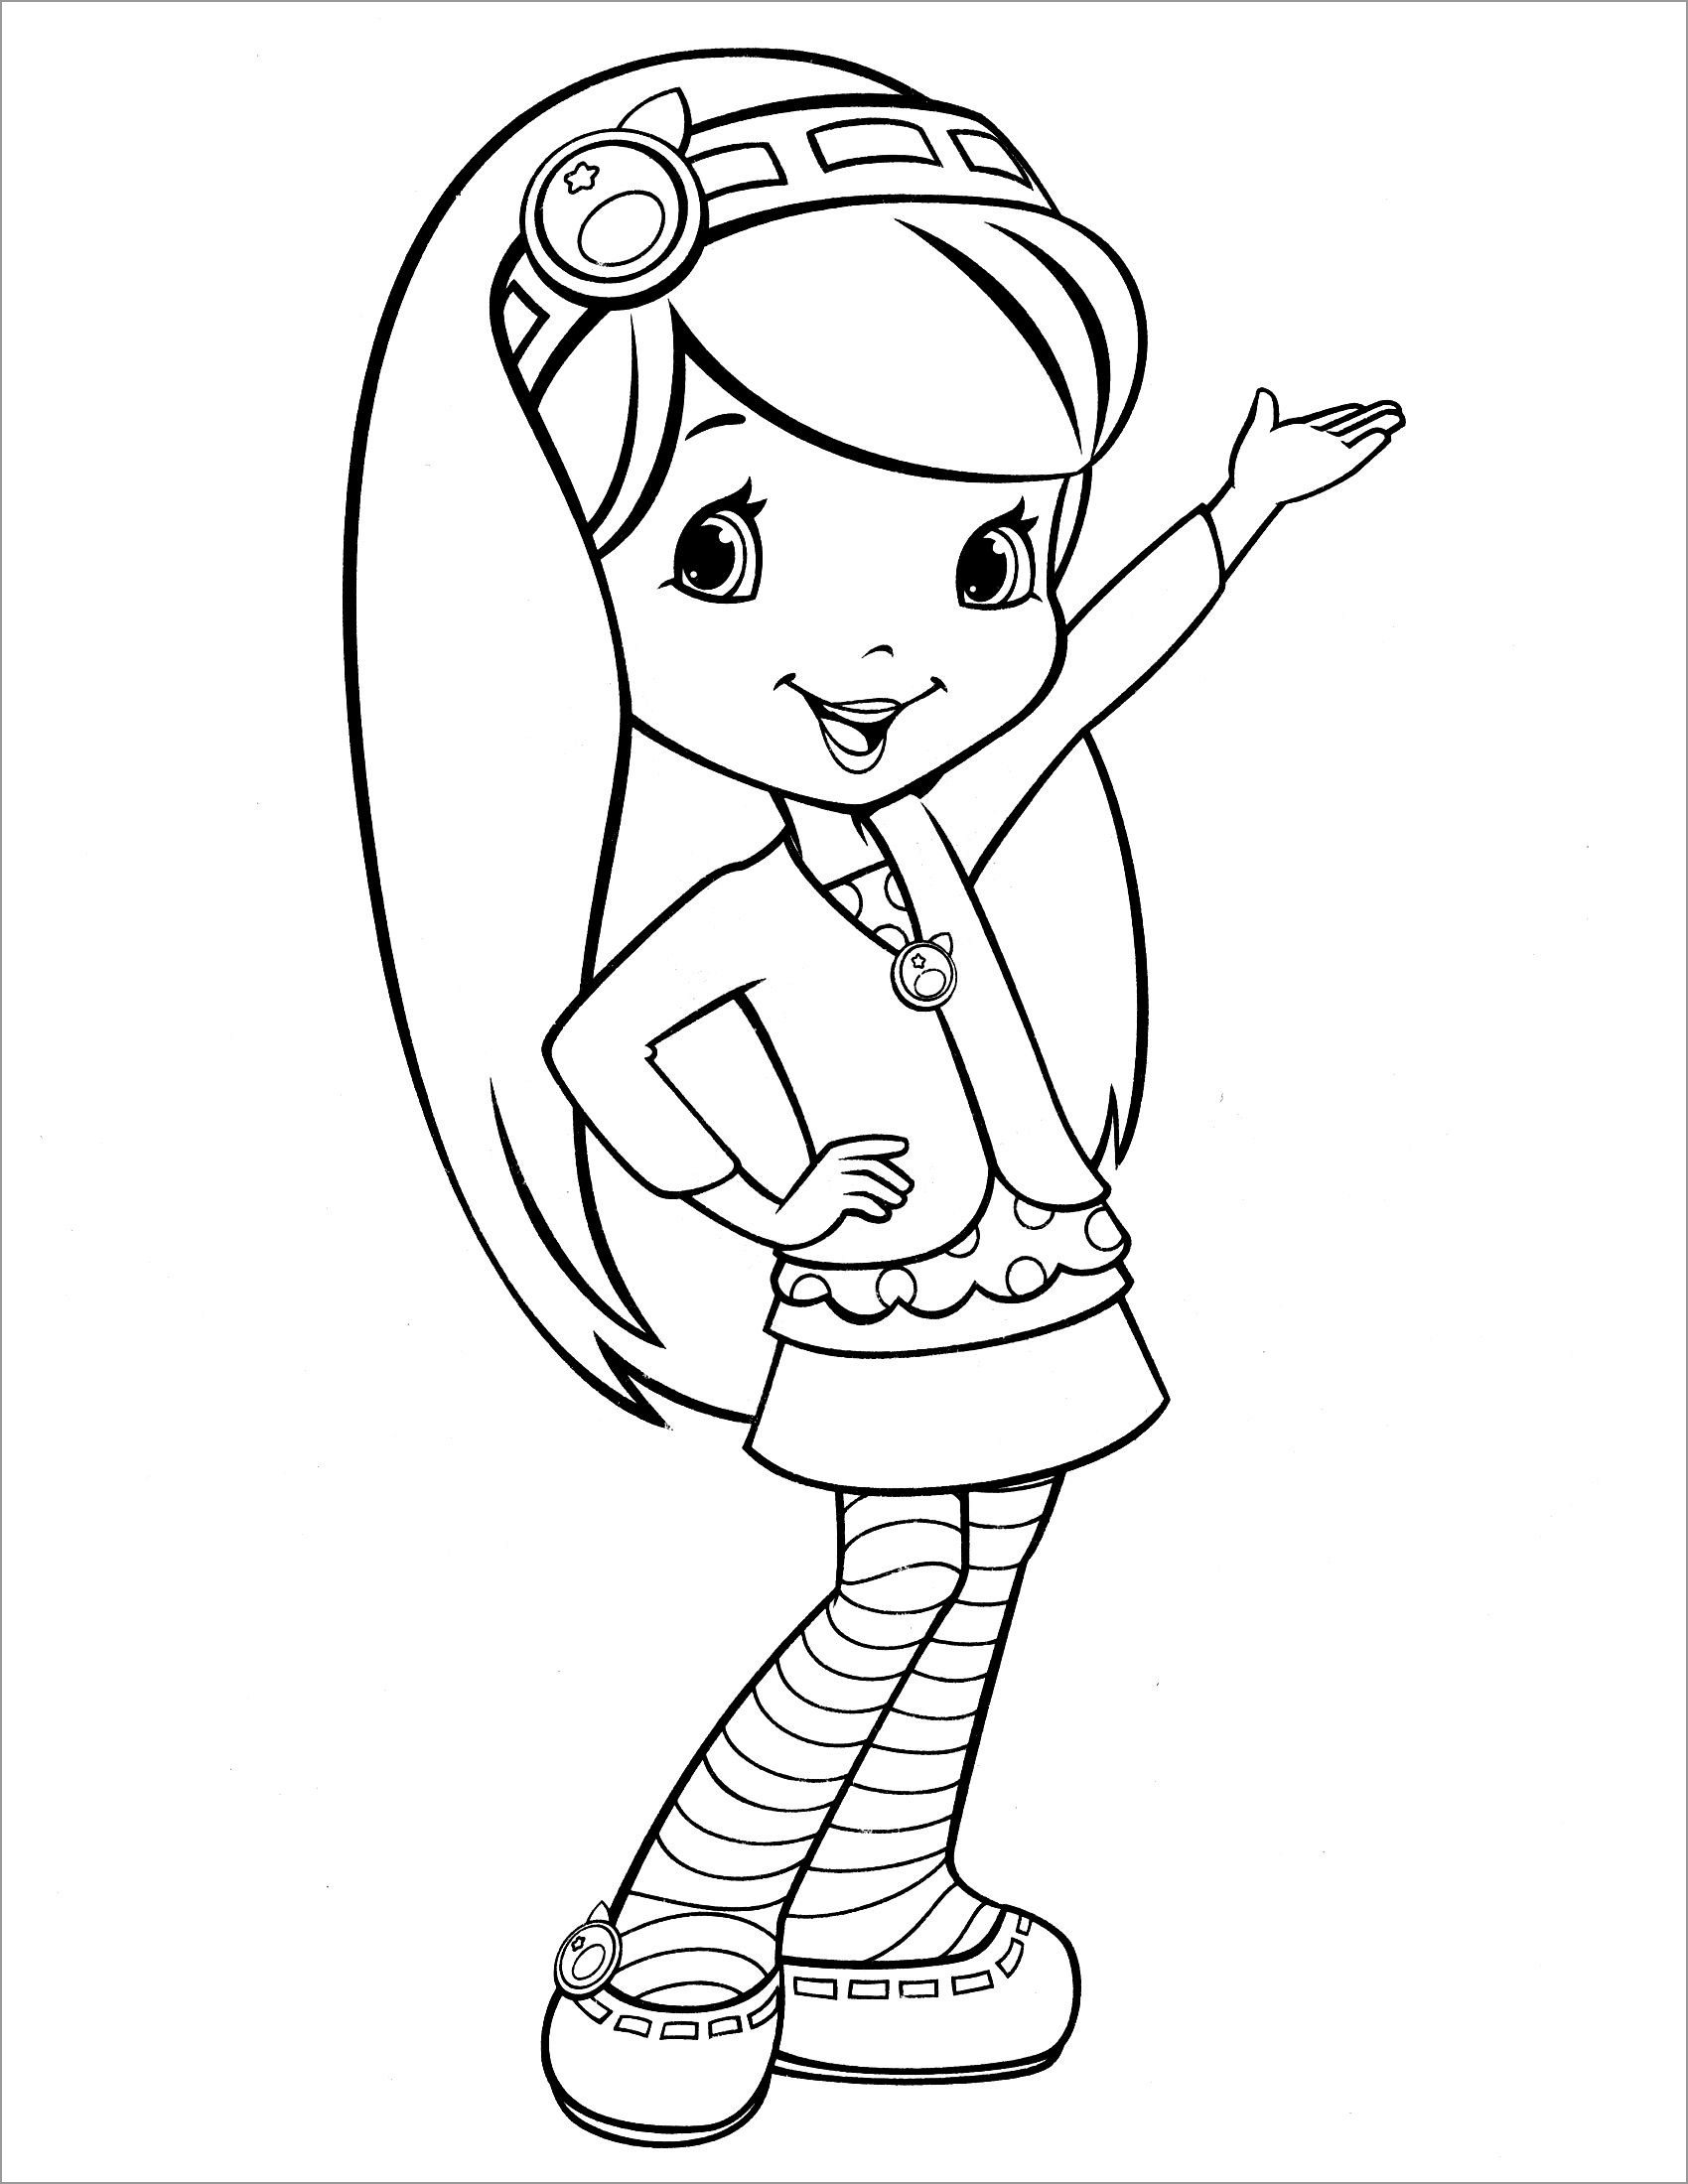 Coloring Page Of Strawberry Shortcake